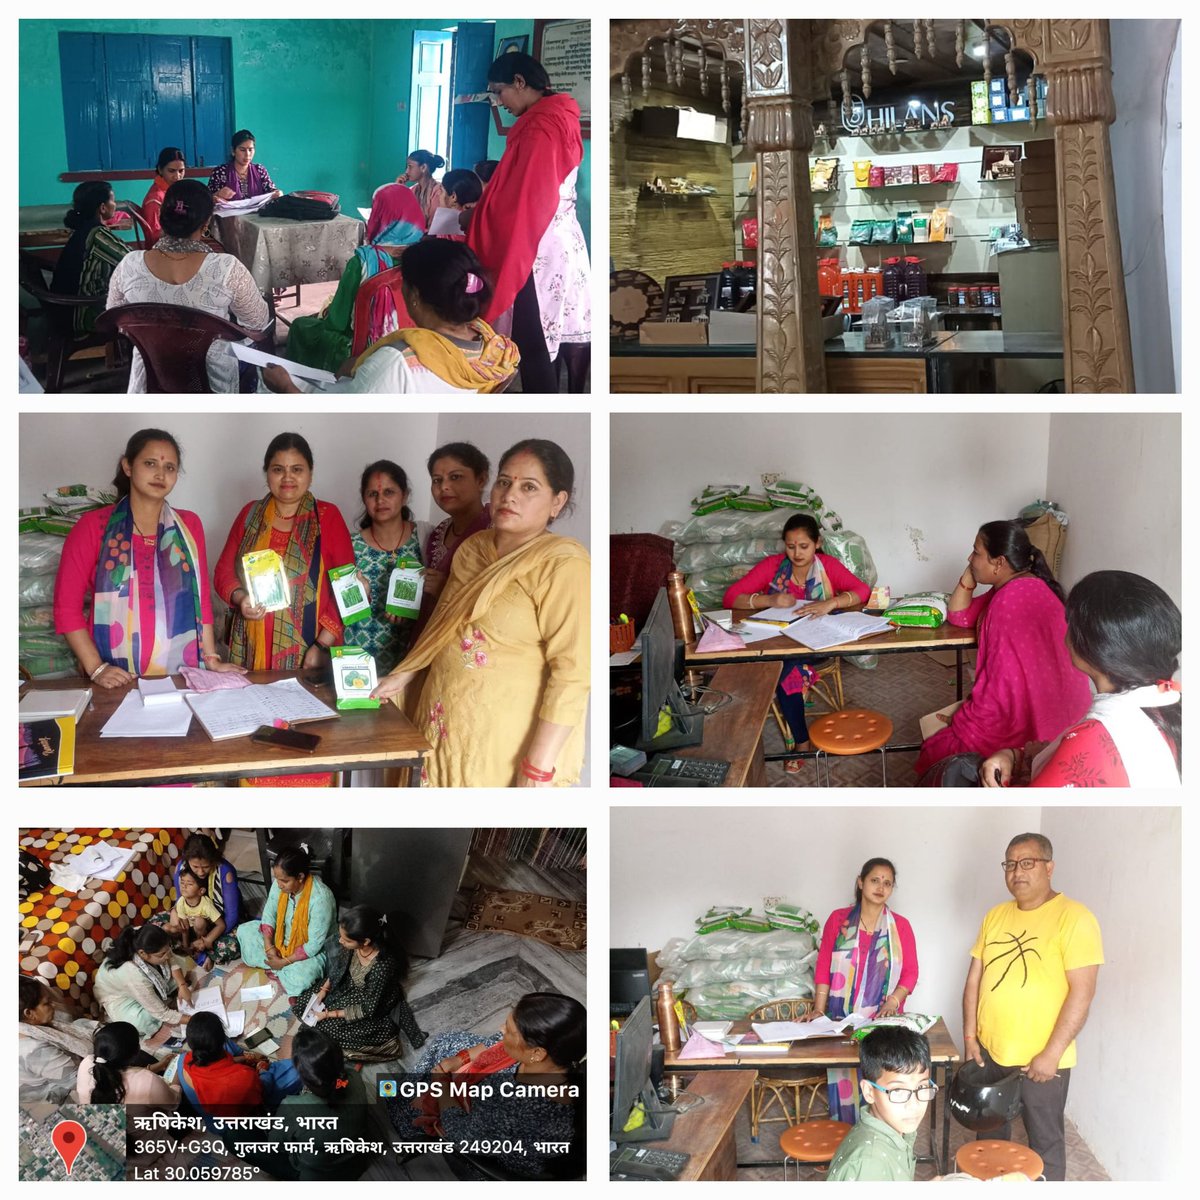 Today on 15/04/2024, the Gayatri Cluster staff filled the forms of ultra poor members in Raiwala Maa Basanti Gram Sangathan and took the first installment of share money of ₹5500 of 11 members of Laxmi Narayan Group in Shyampur,